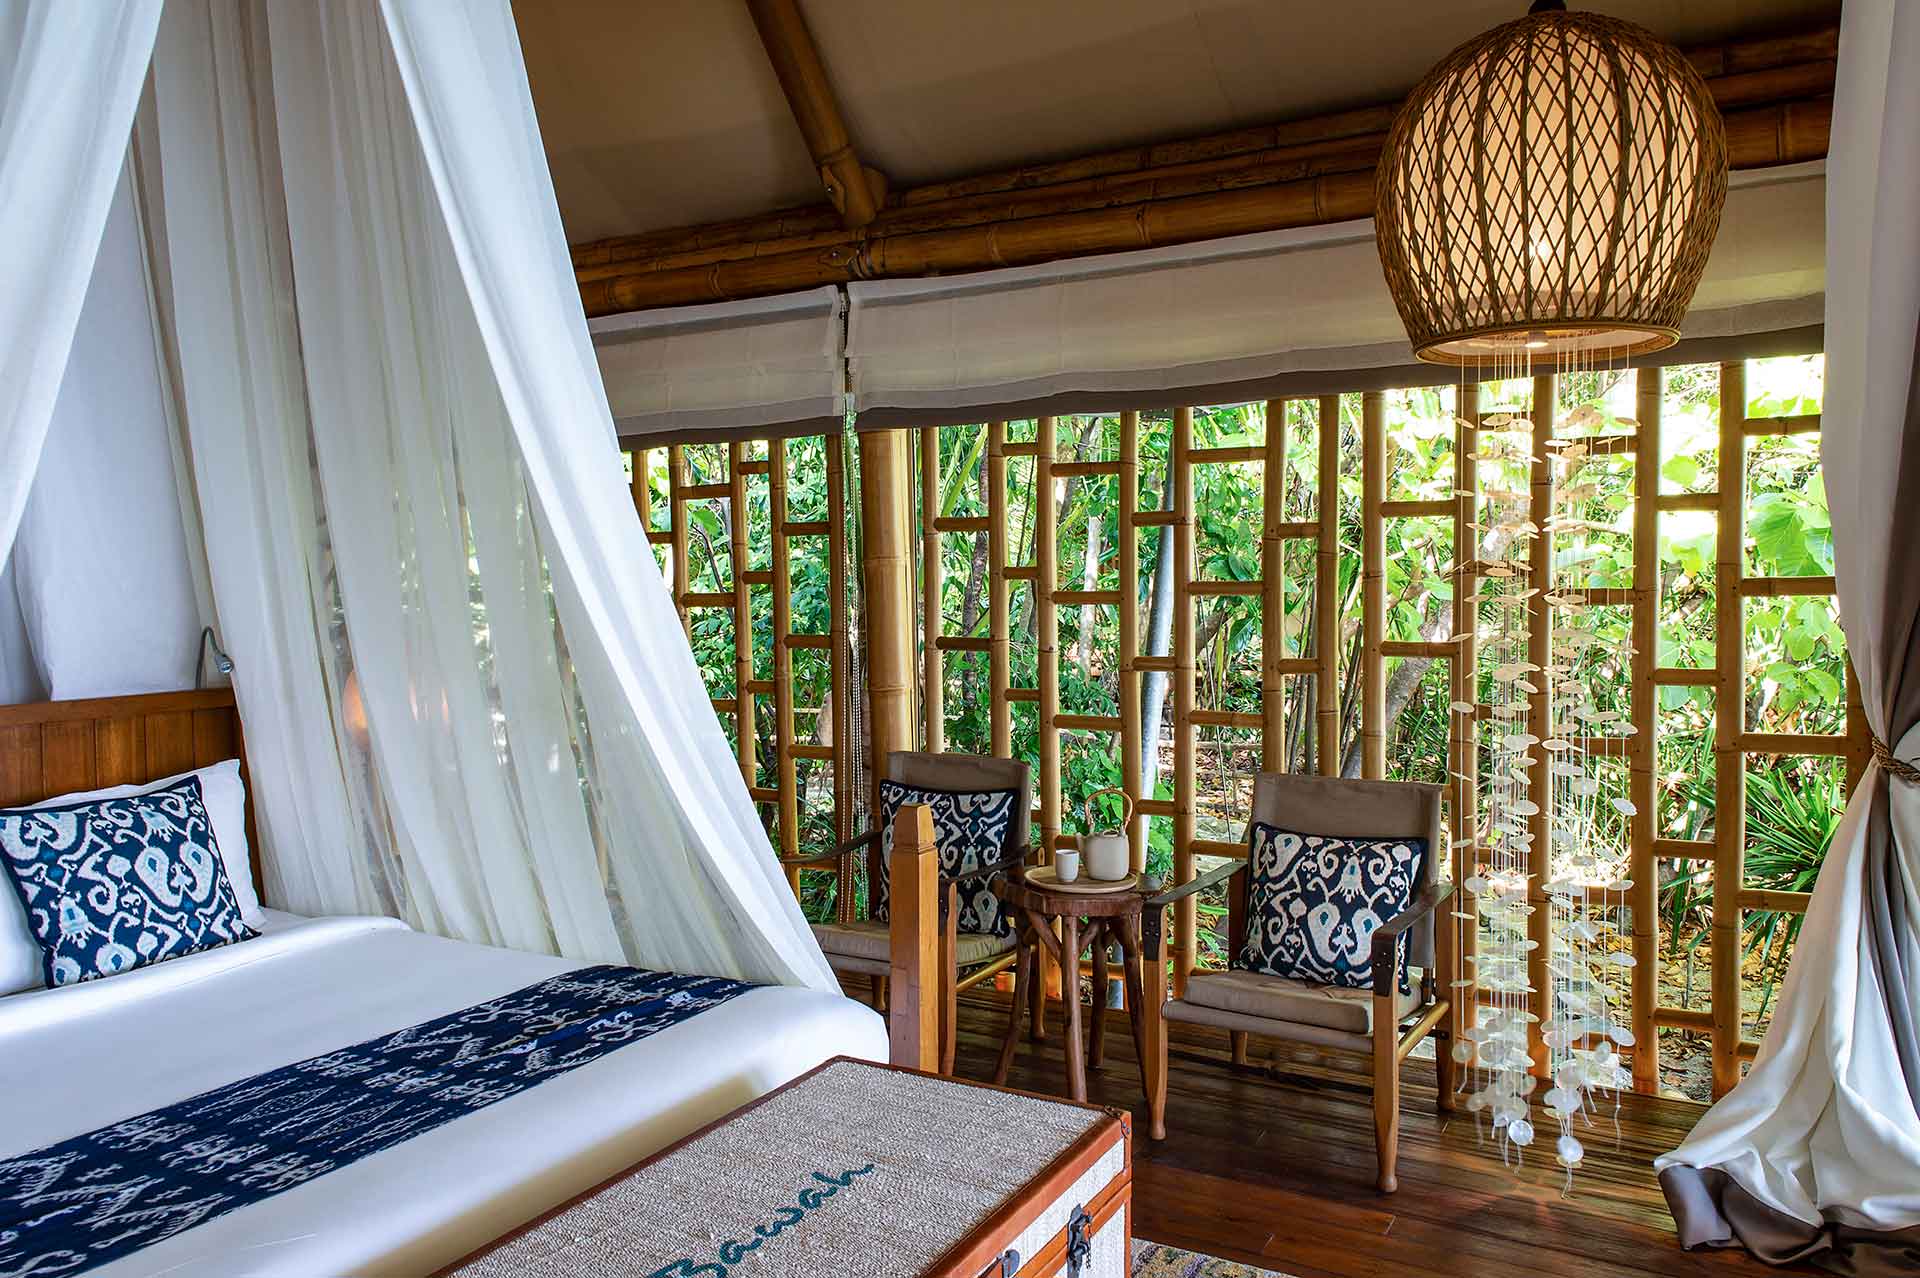 Bawah Reserve's Tented Garden Suite. Experience garden views, jungle serenity, & a luxurious verandah in our unique accommodation.